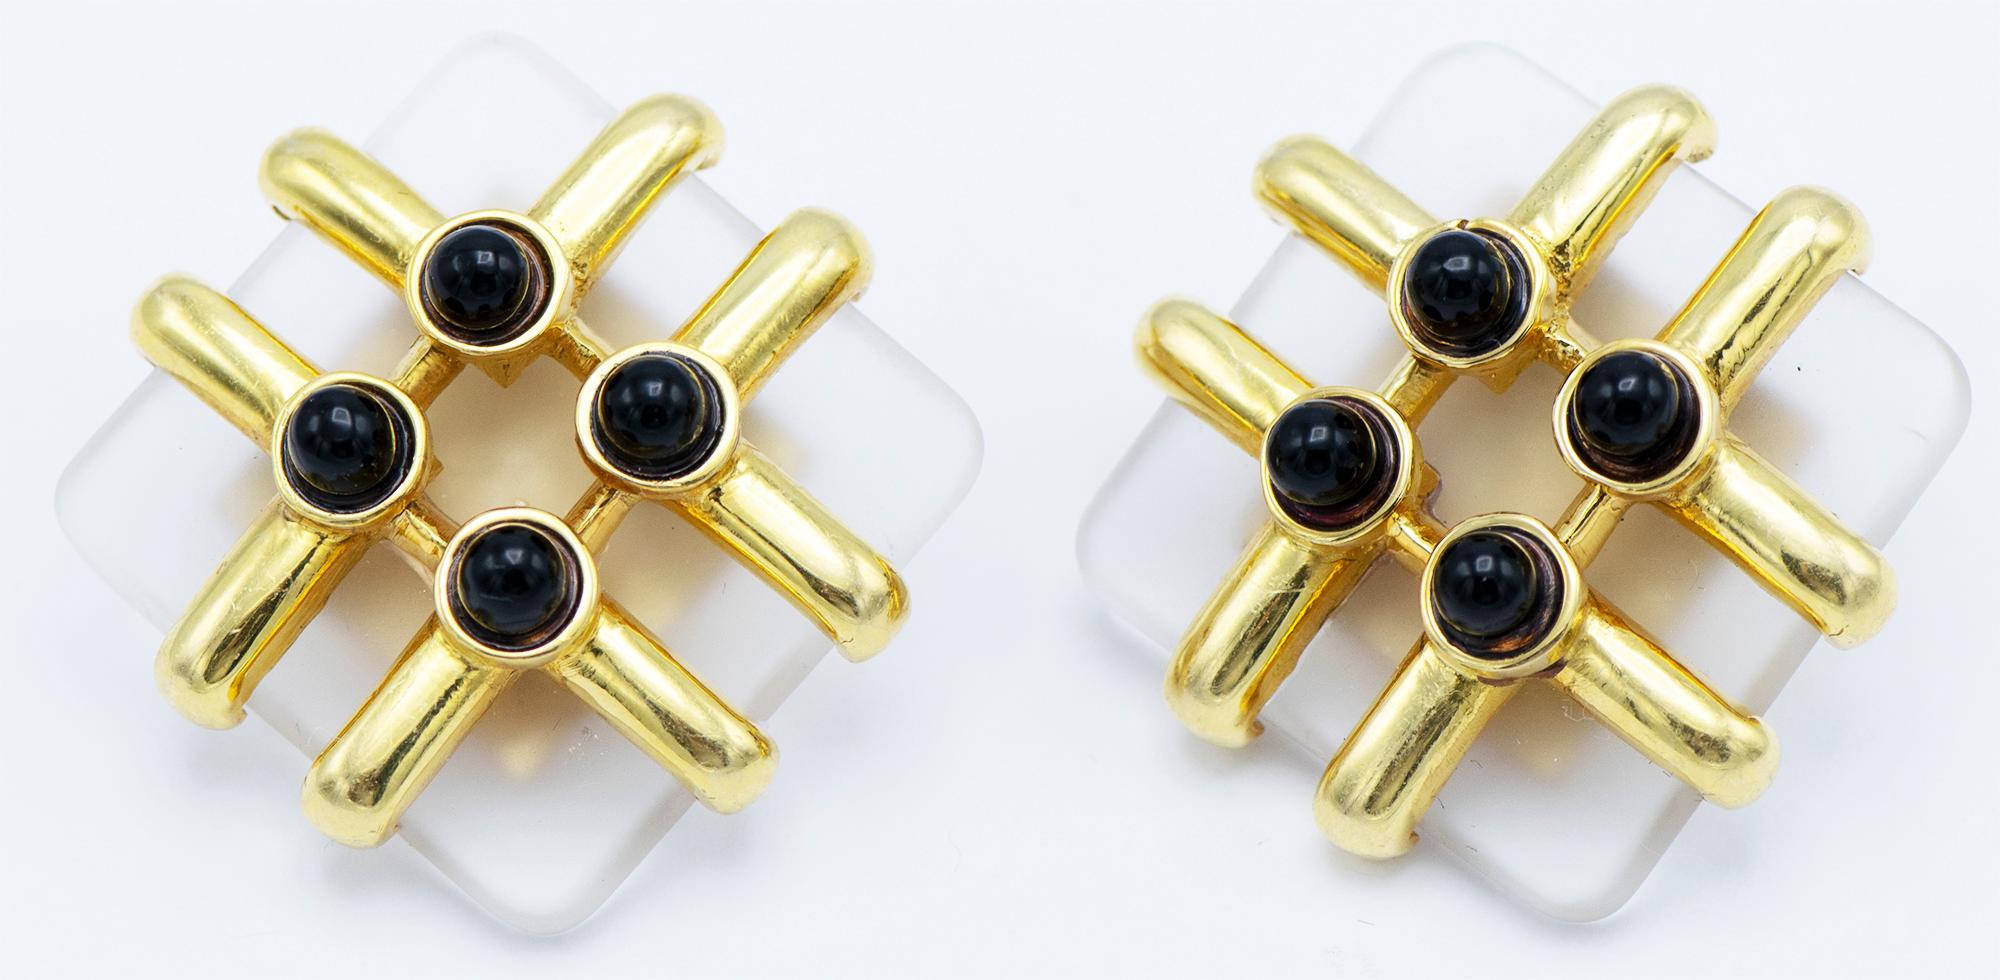  Cipullo Cartier Rock Crystal Earrings , each designed as a frosted rock crystal square, trimmed with sculpted gold and bisected cabchon black onyx. 
Metal: 18K Yellow Good
Stones: 8 Cabochon bisected black onyx stones  